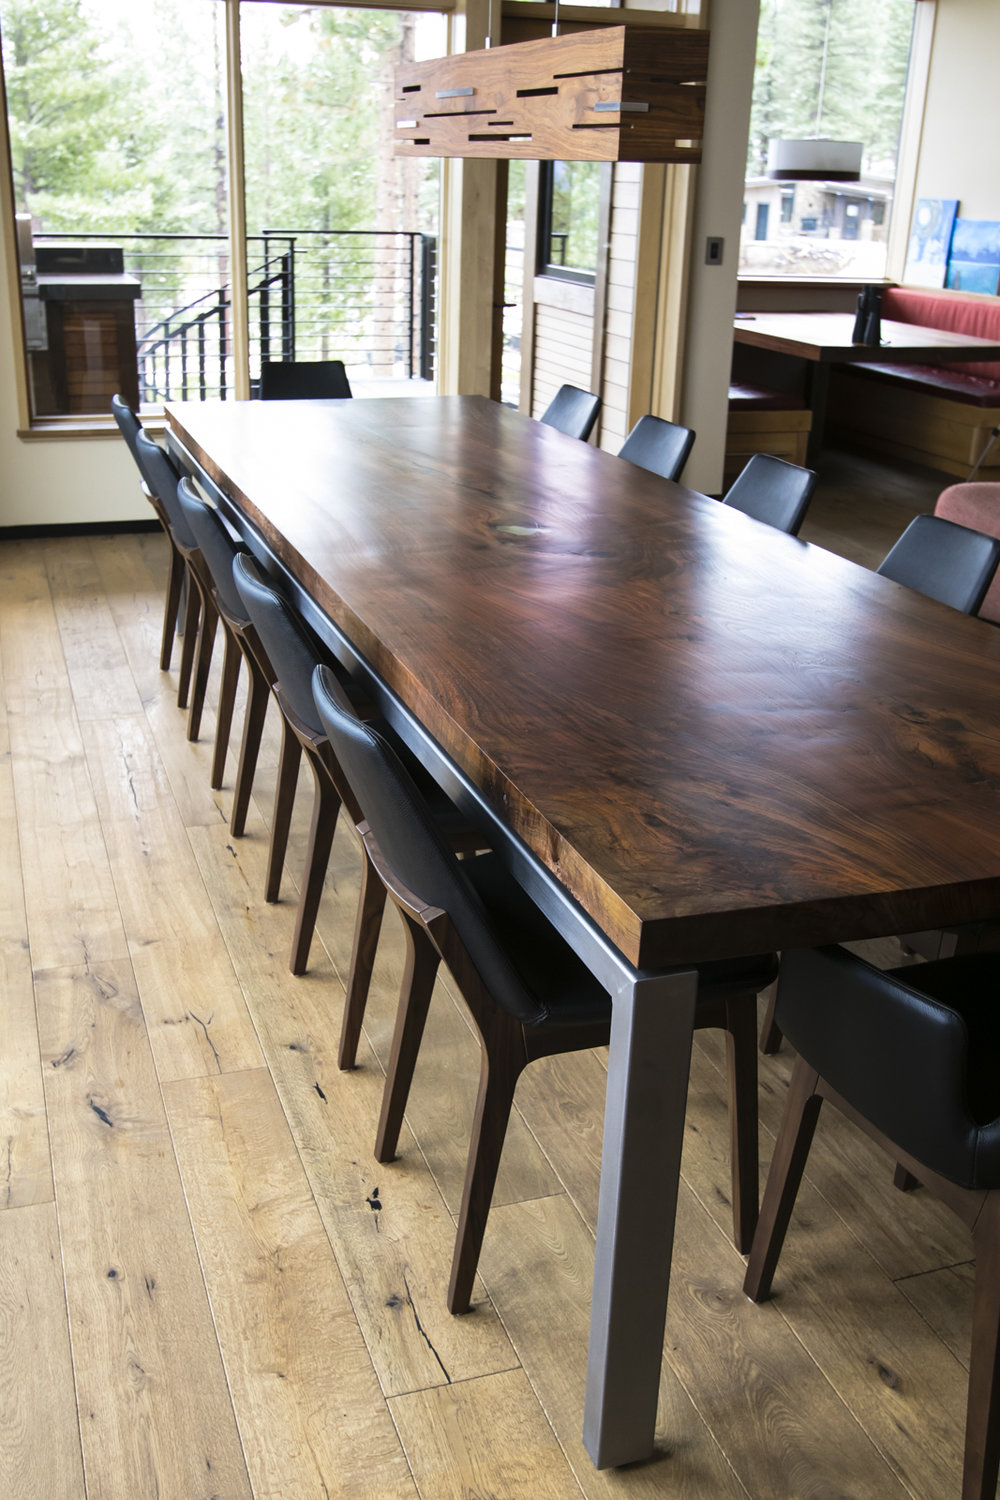 Lookout Walnut Slab Dining Table Floating Steel Base Mez Works Furniture Lake Tahoe And Sf Bay Area